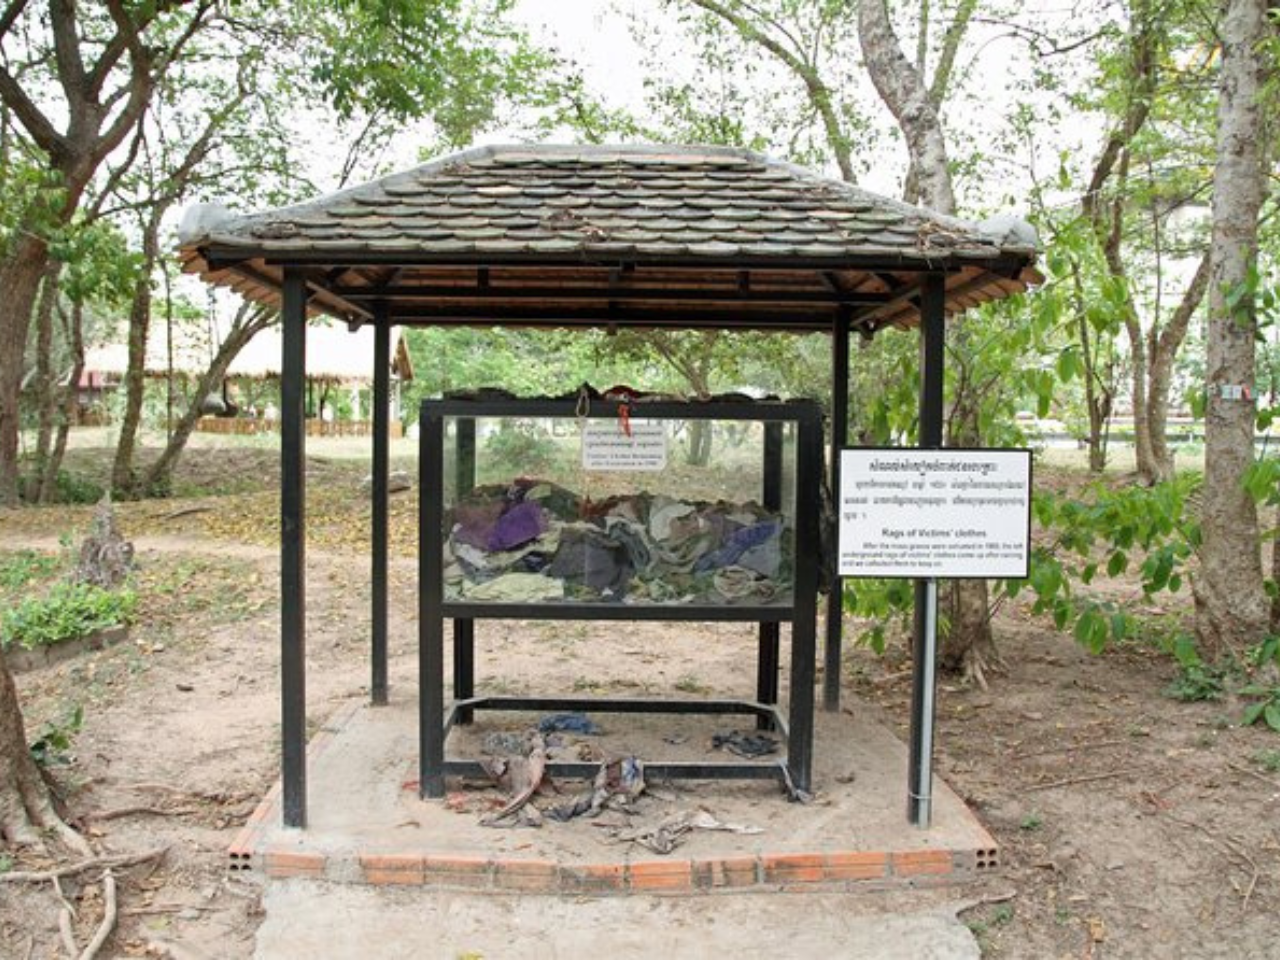 Phnom Penh Tour with Tuol Sleng Genocide Museum and the Killing Fields